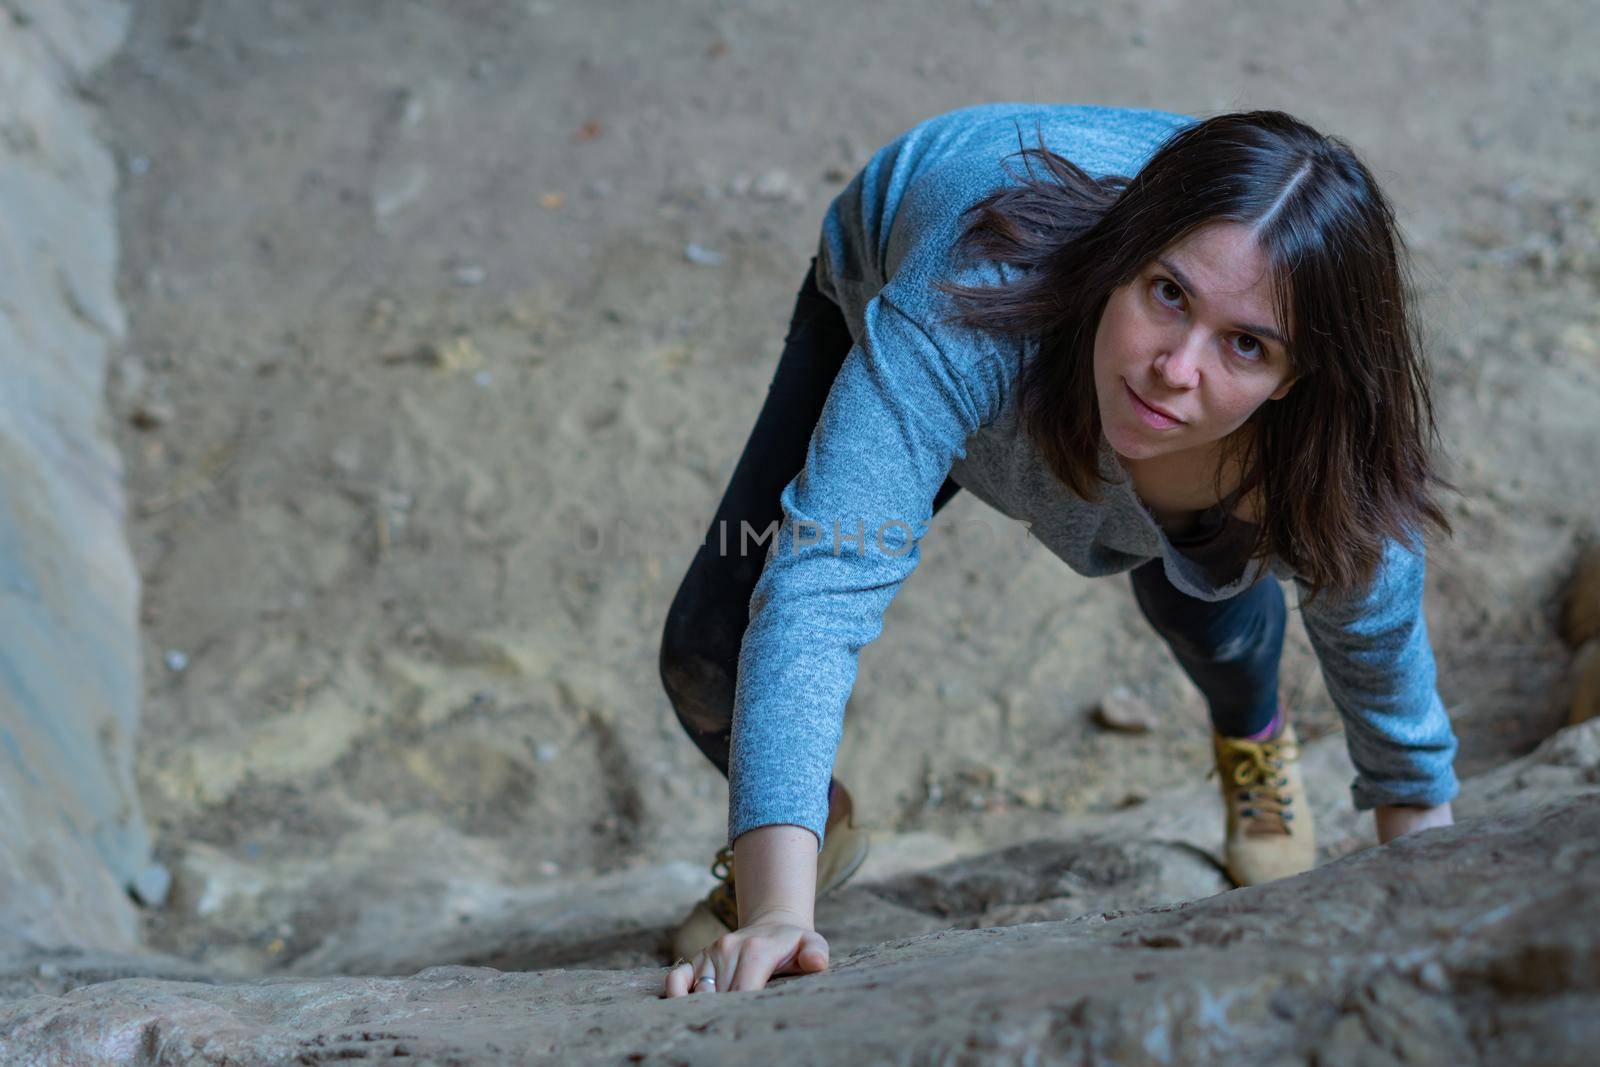 young girl learning rock climbing in high mountain with blue sweater, black tights and boots.